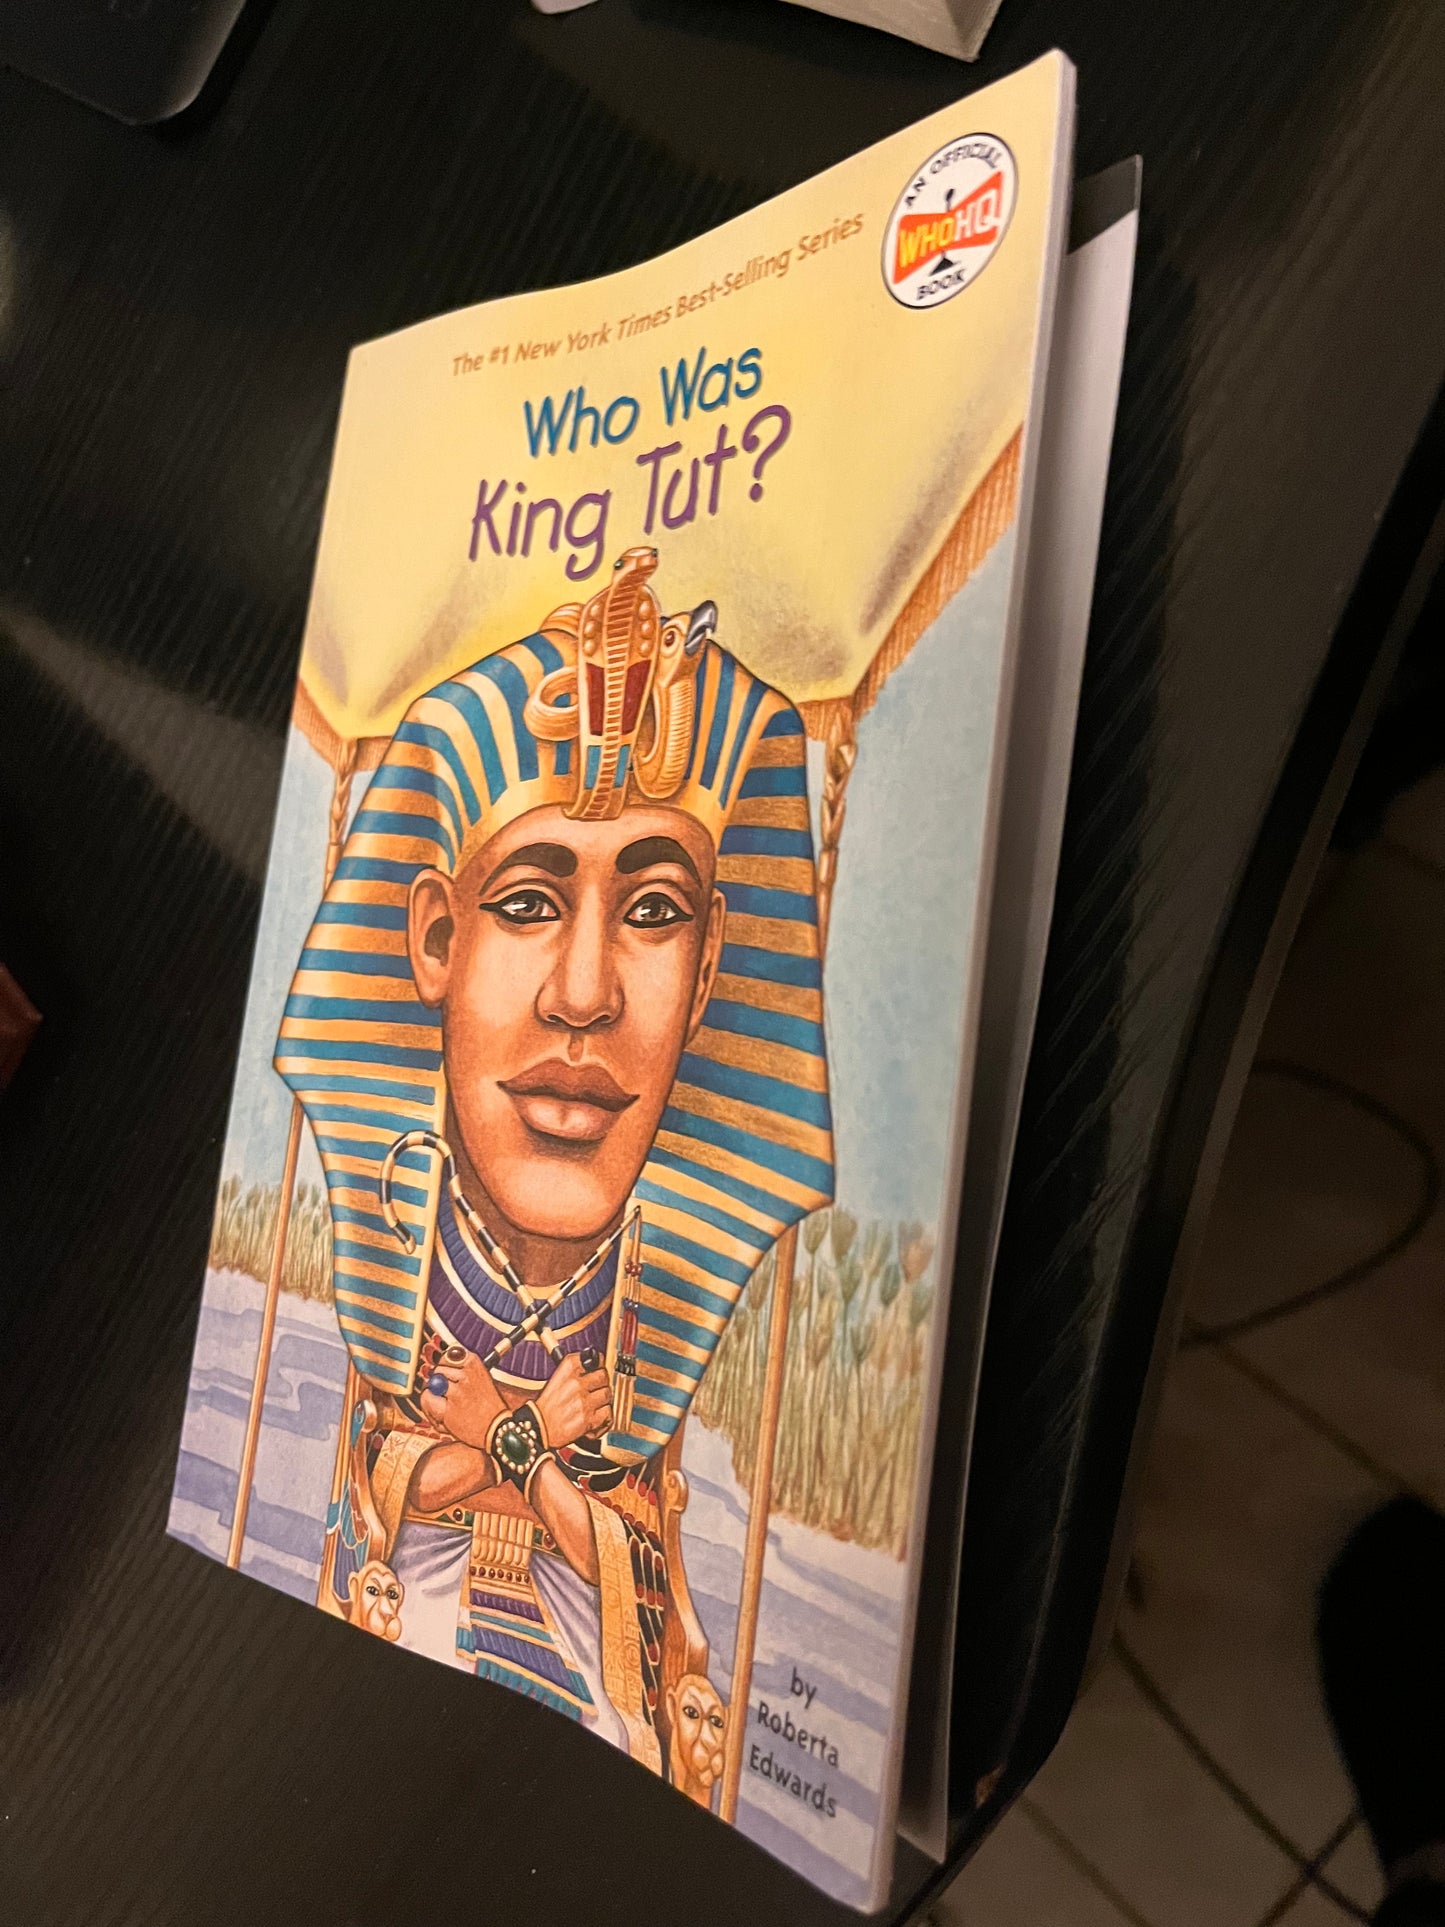 WHO WAS KING TUT? By Robert Edwards